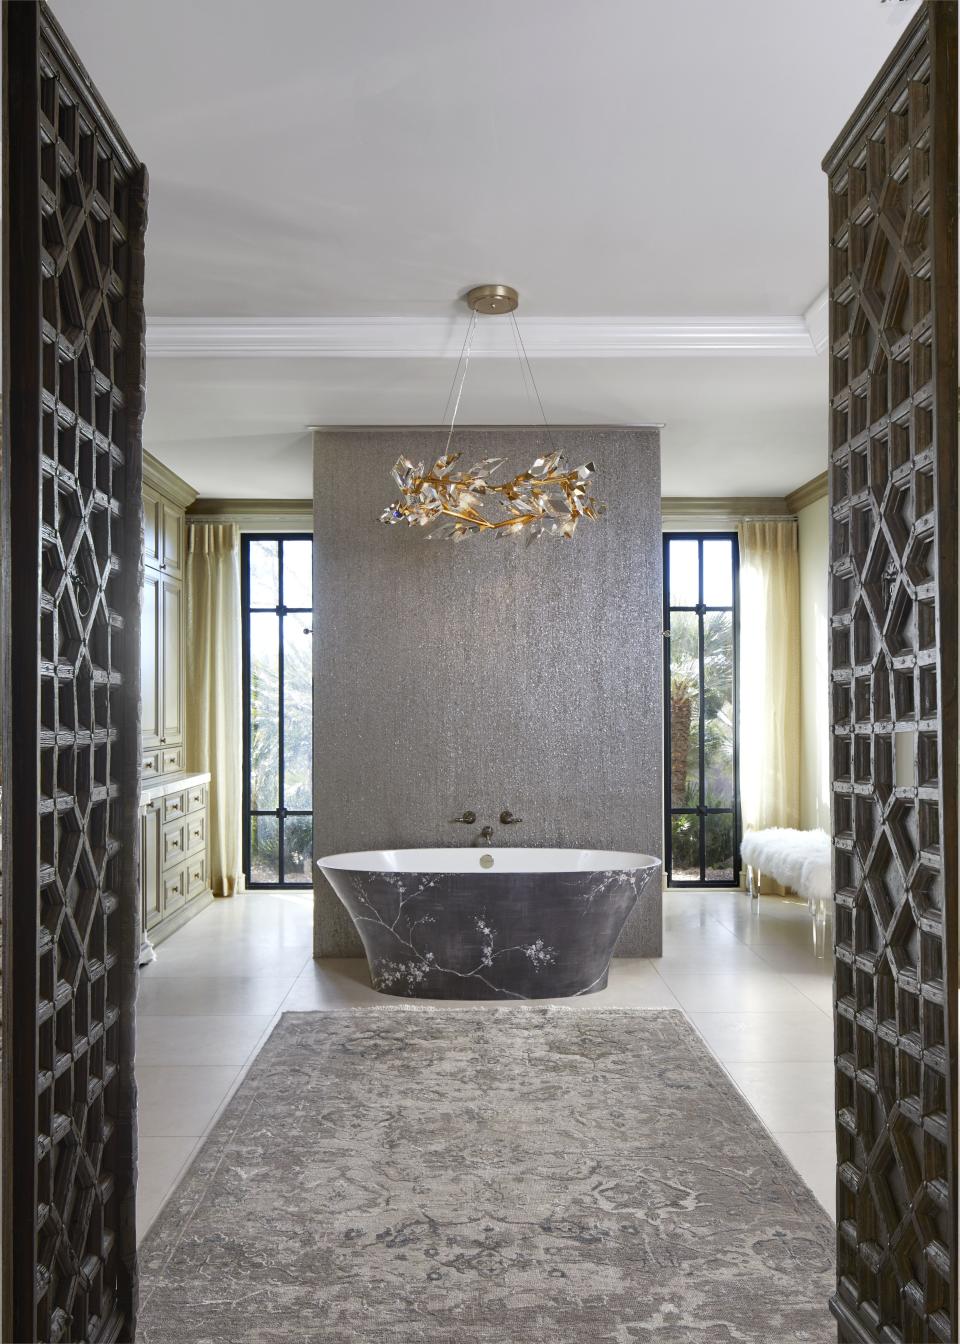 A bathroom with embellished elements